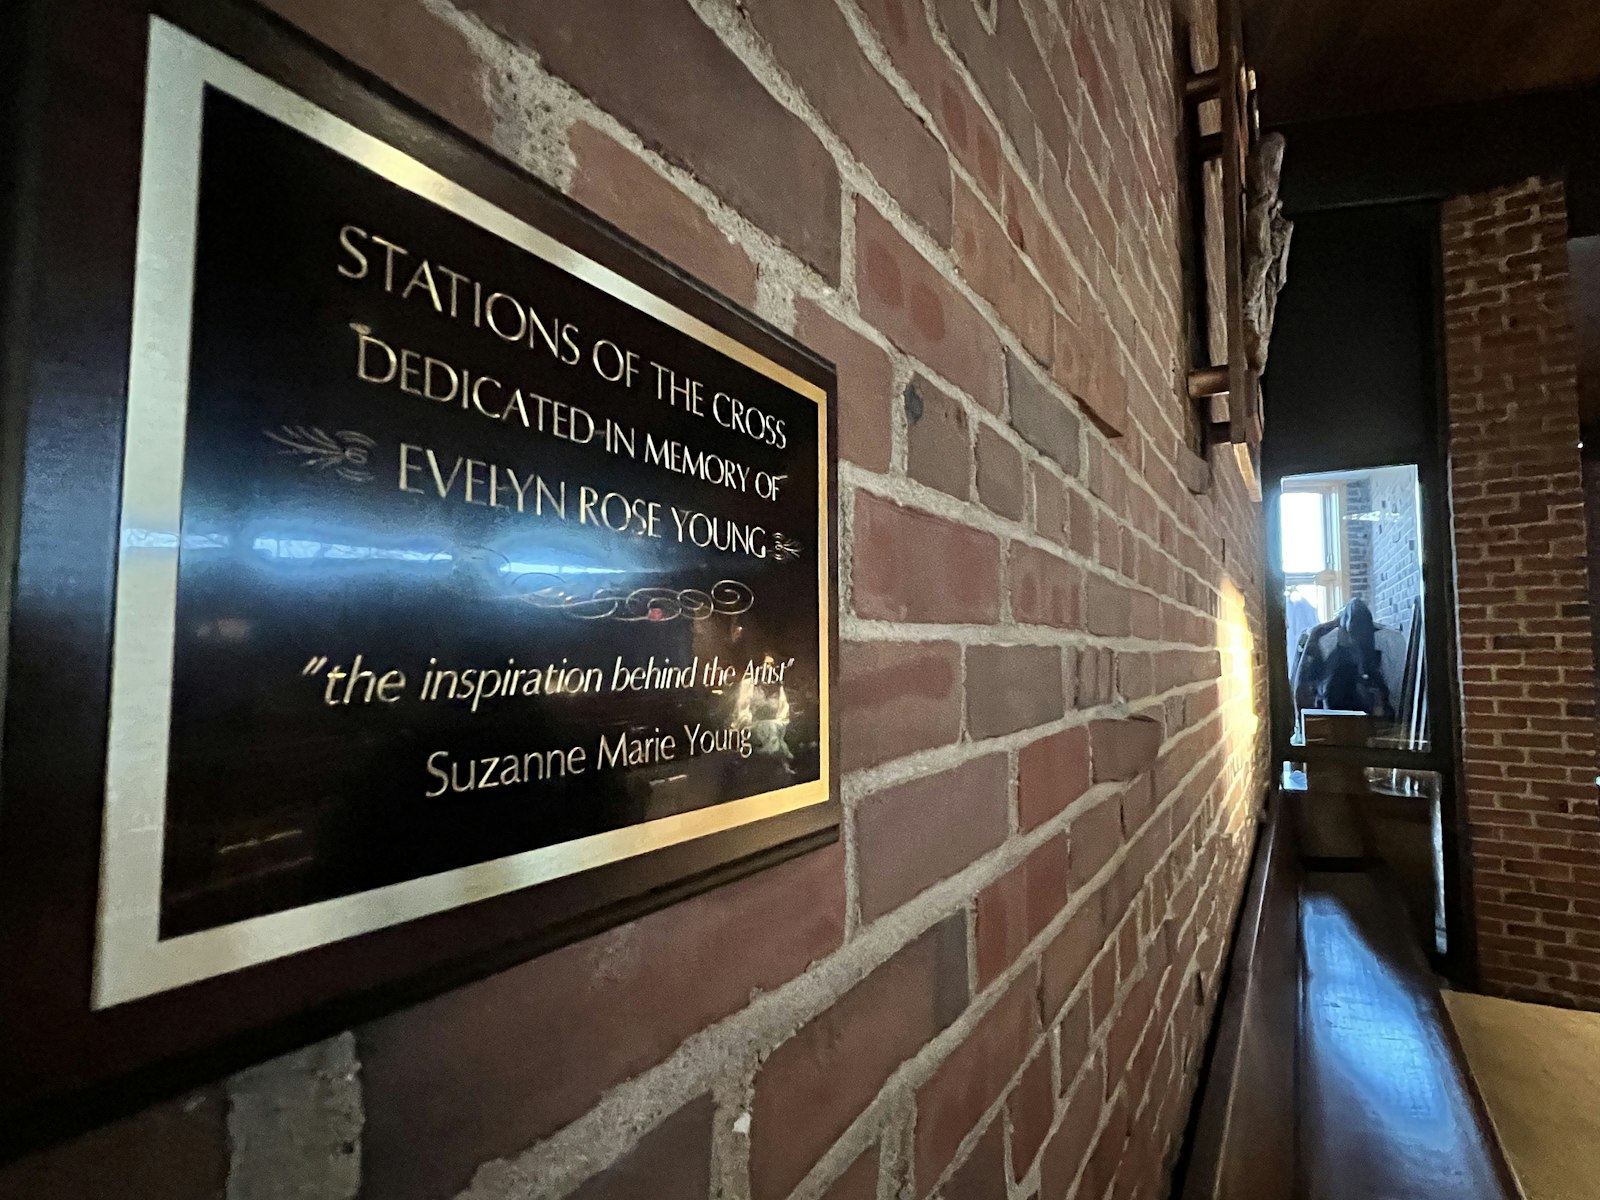 A plaque hangs near the Stations of the Cross at St. John Fisher Chapel University Parish in Auburn Hills dedication the stations to Young's mother, Evelyn Rose Young, who passed away in 2020. (Michael Stechschulte | Detroit Catholic)